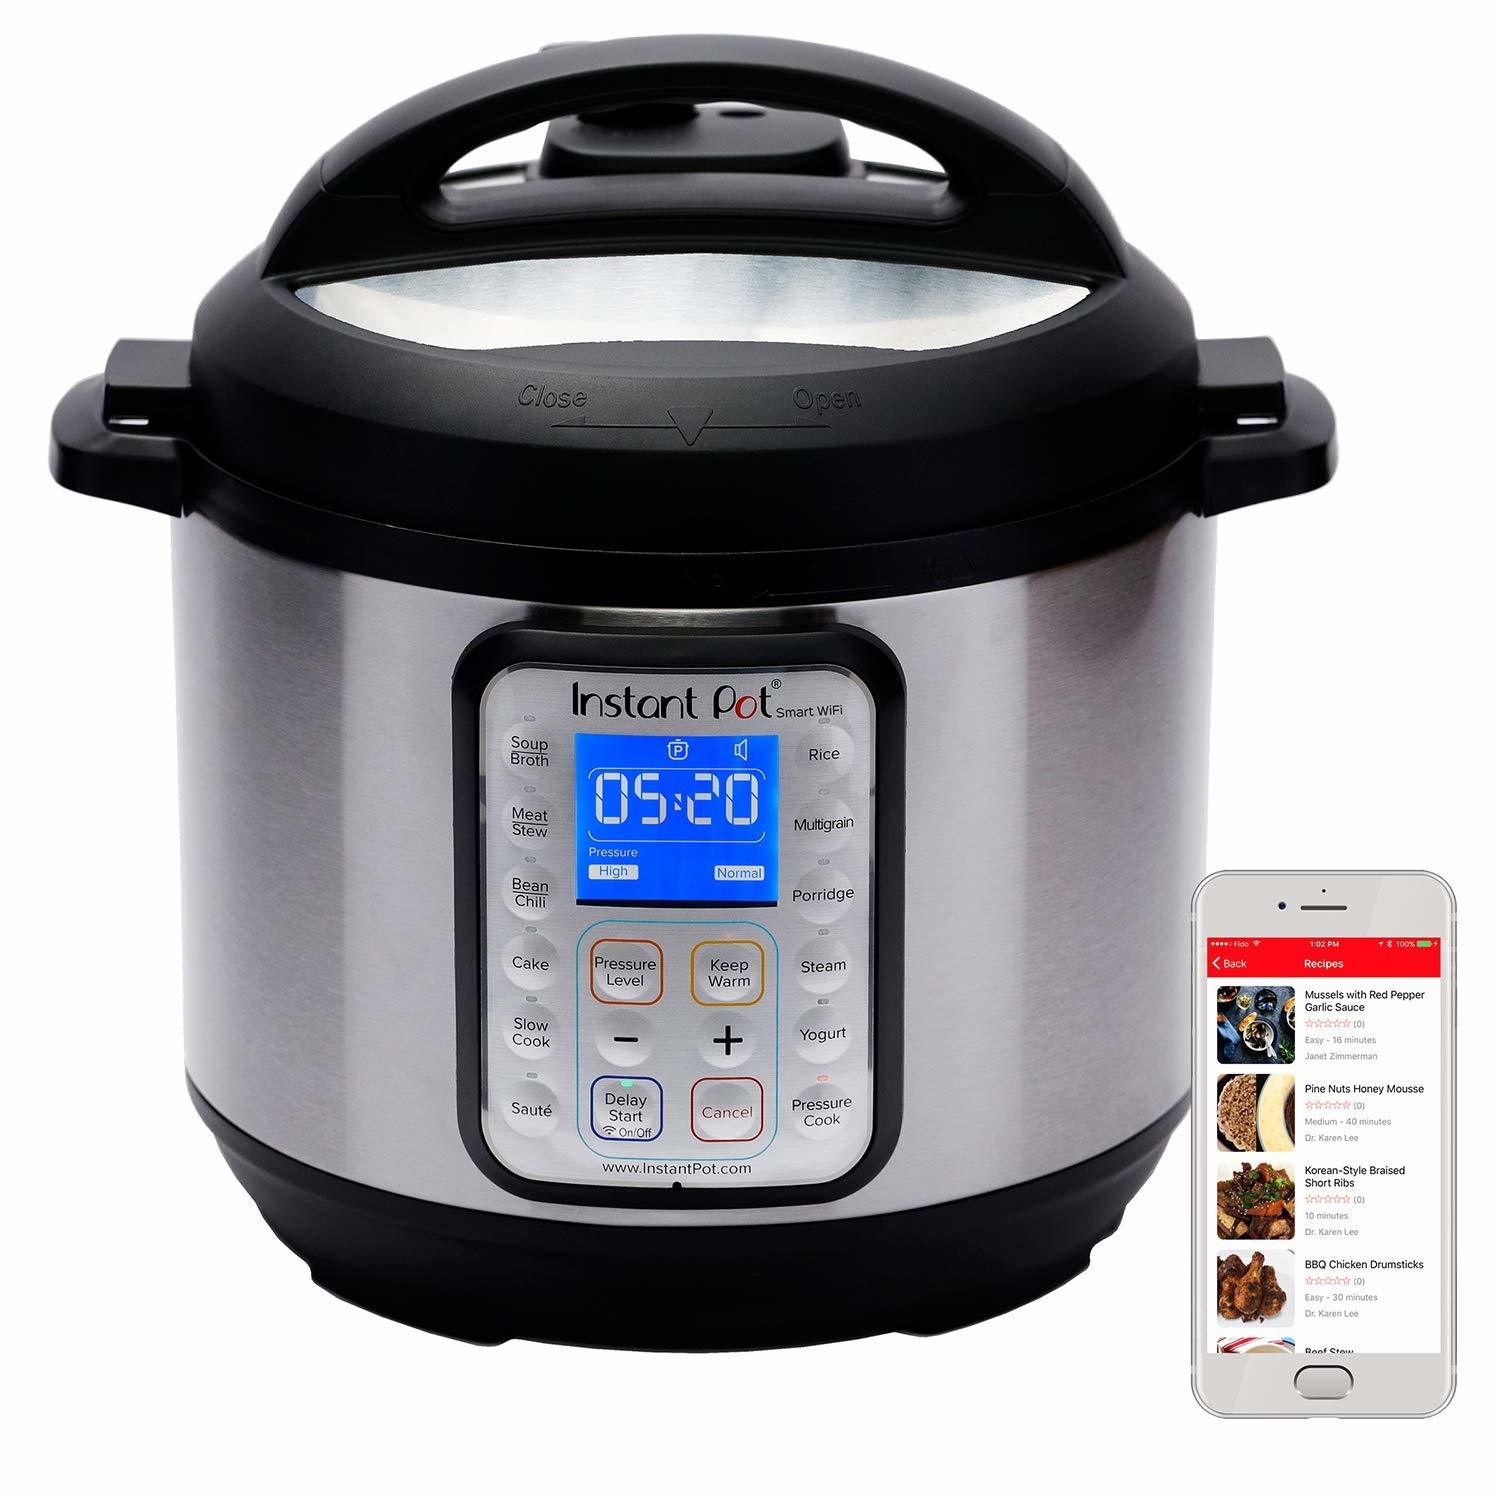 Instant Pot Smart WiFi 6 Quart Electric Pressure Cooker For $89.95 Shipped From Amazon After $60 Cyber Monday Savings!